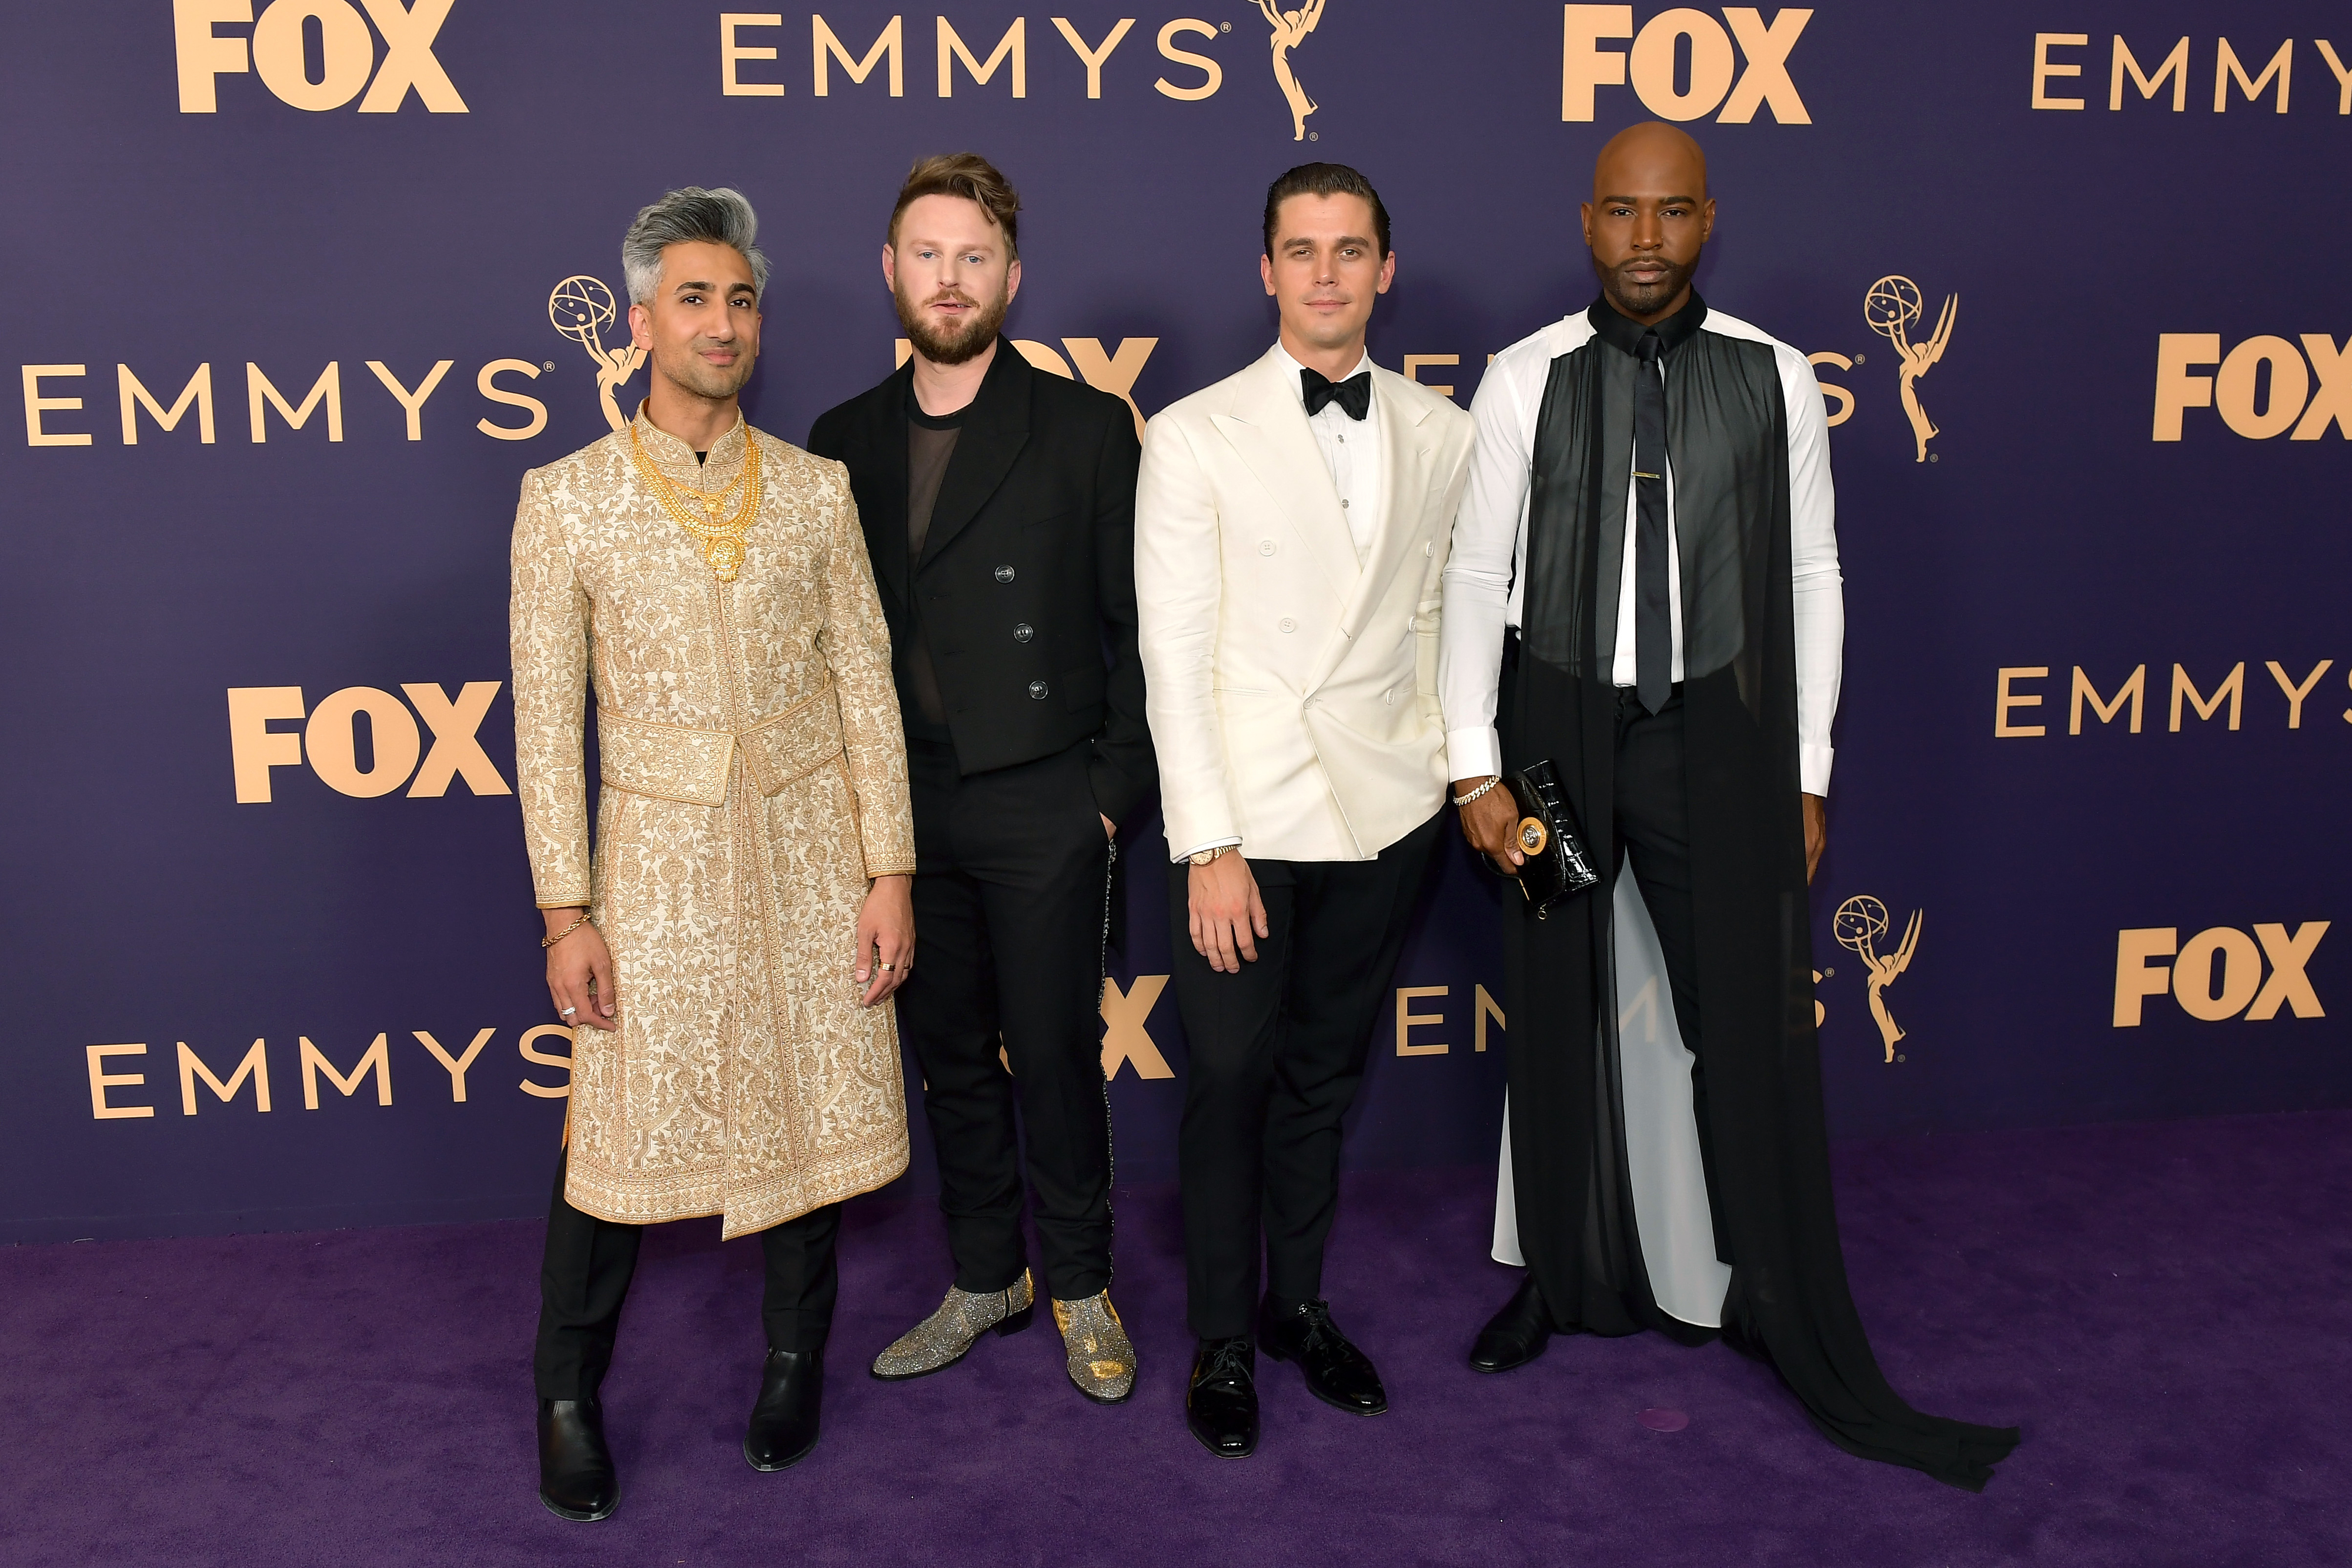 The cast of Queer Eye pose for a group photo on the red carpet